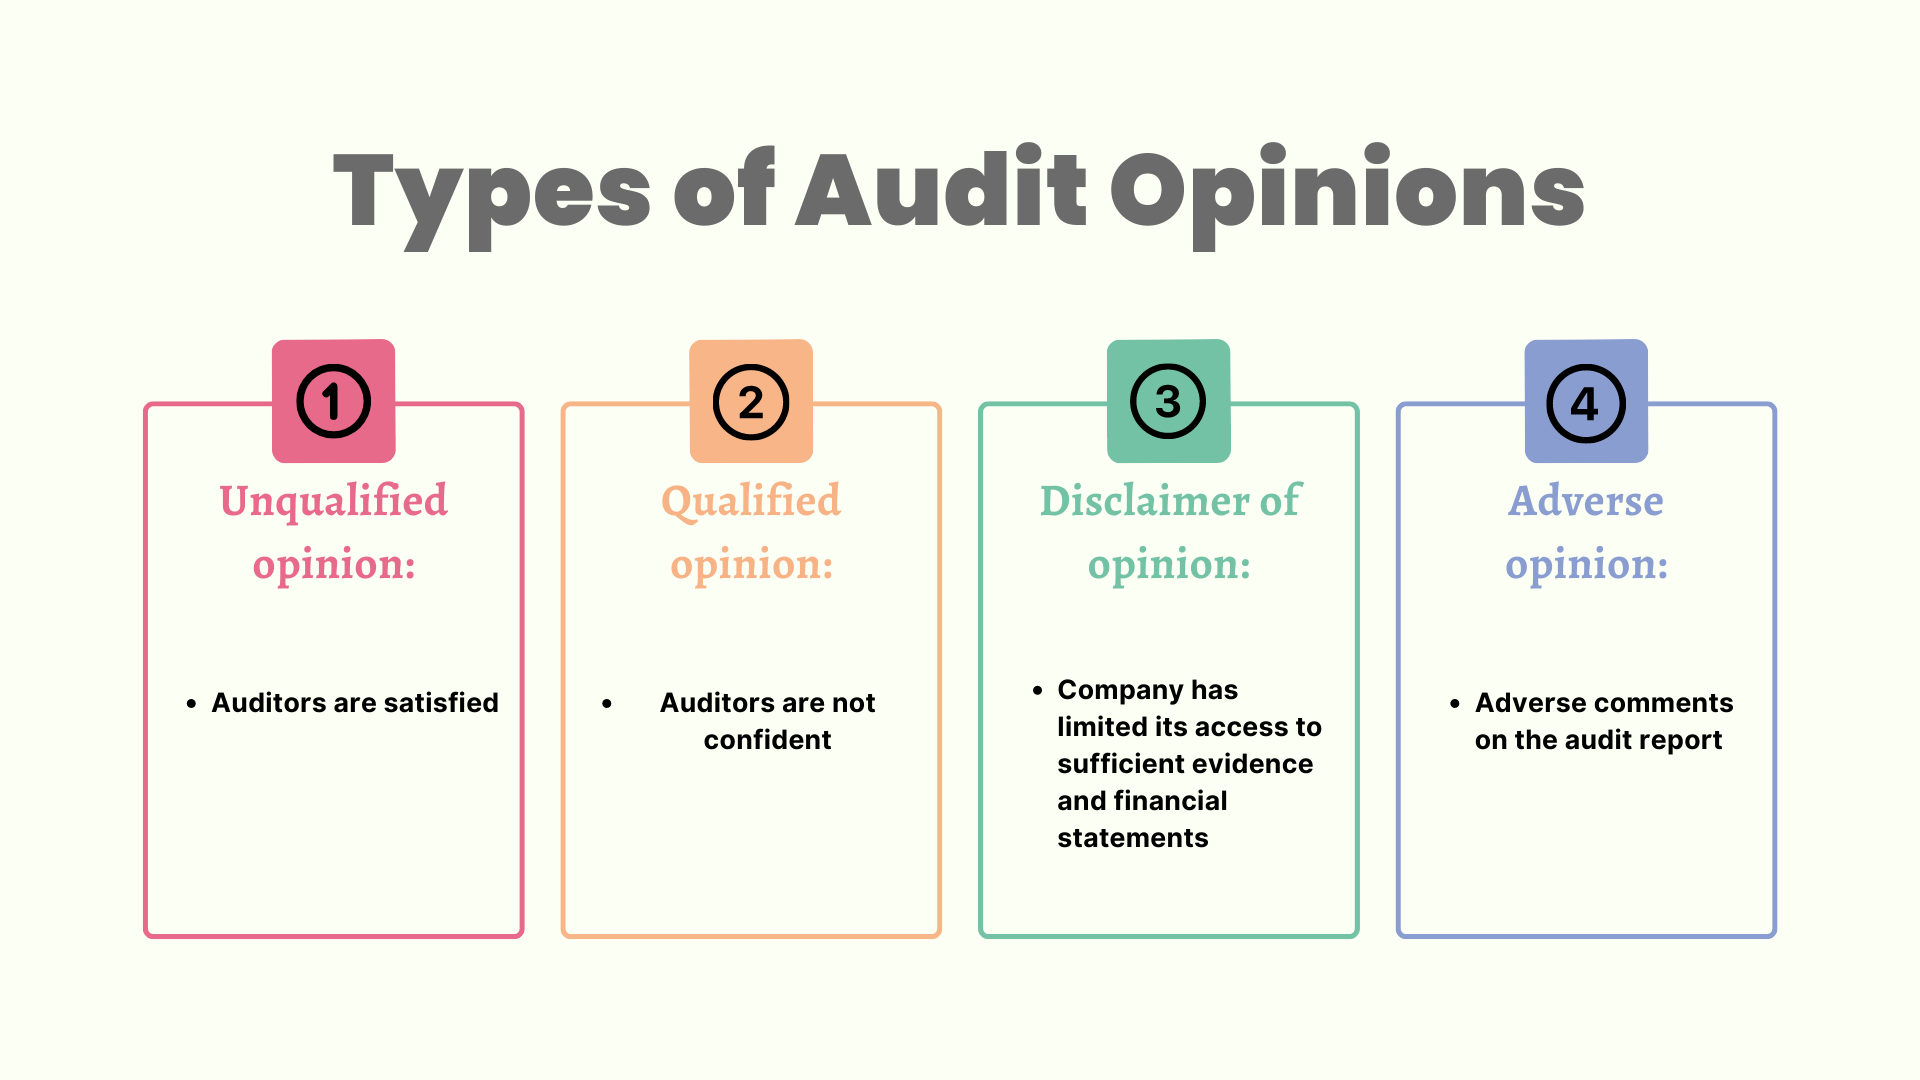 Types of Audit Opinions